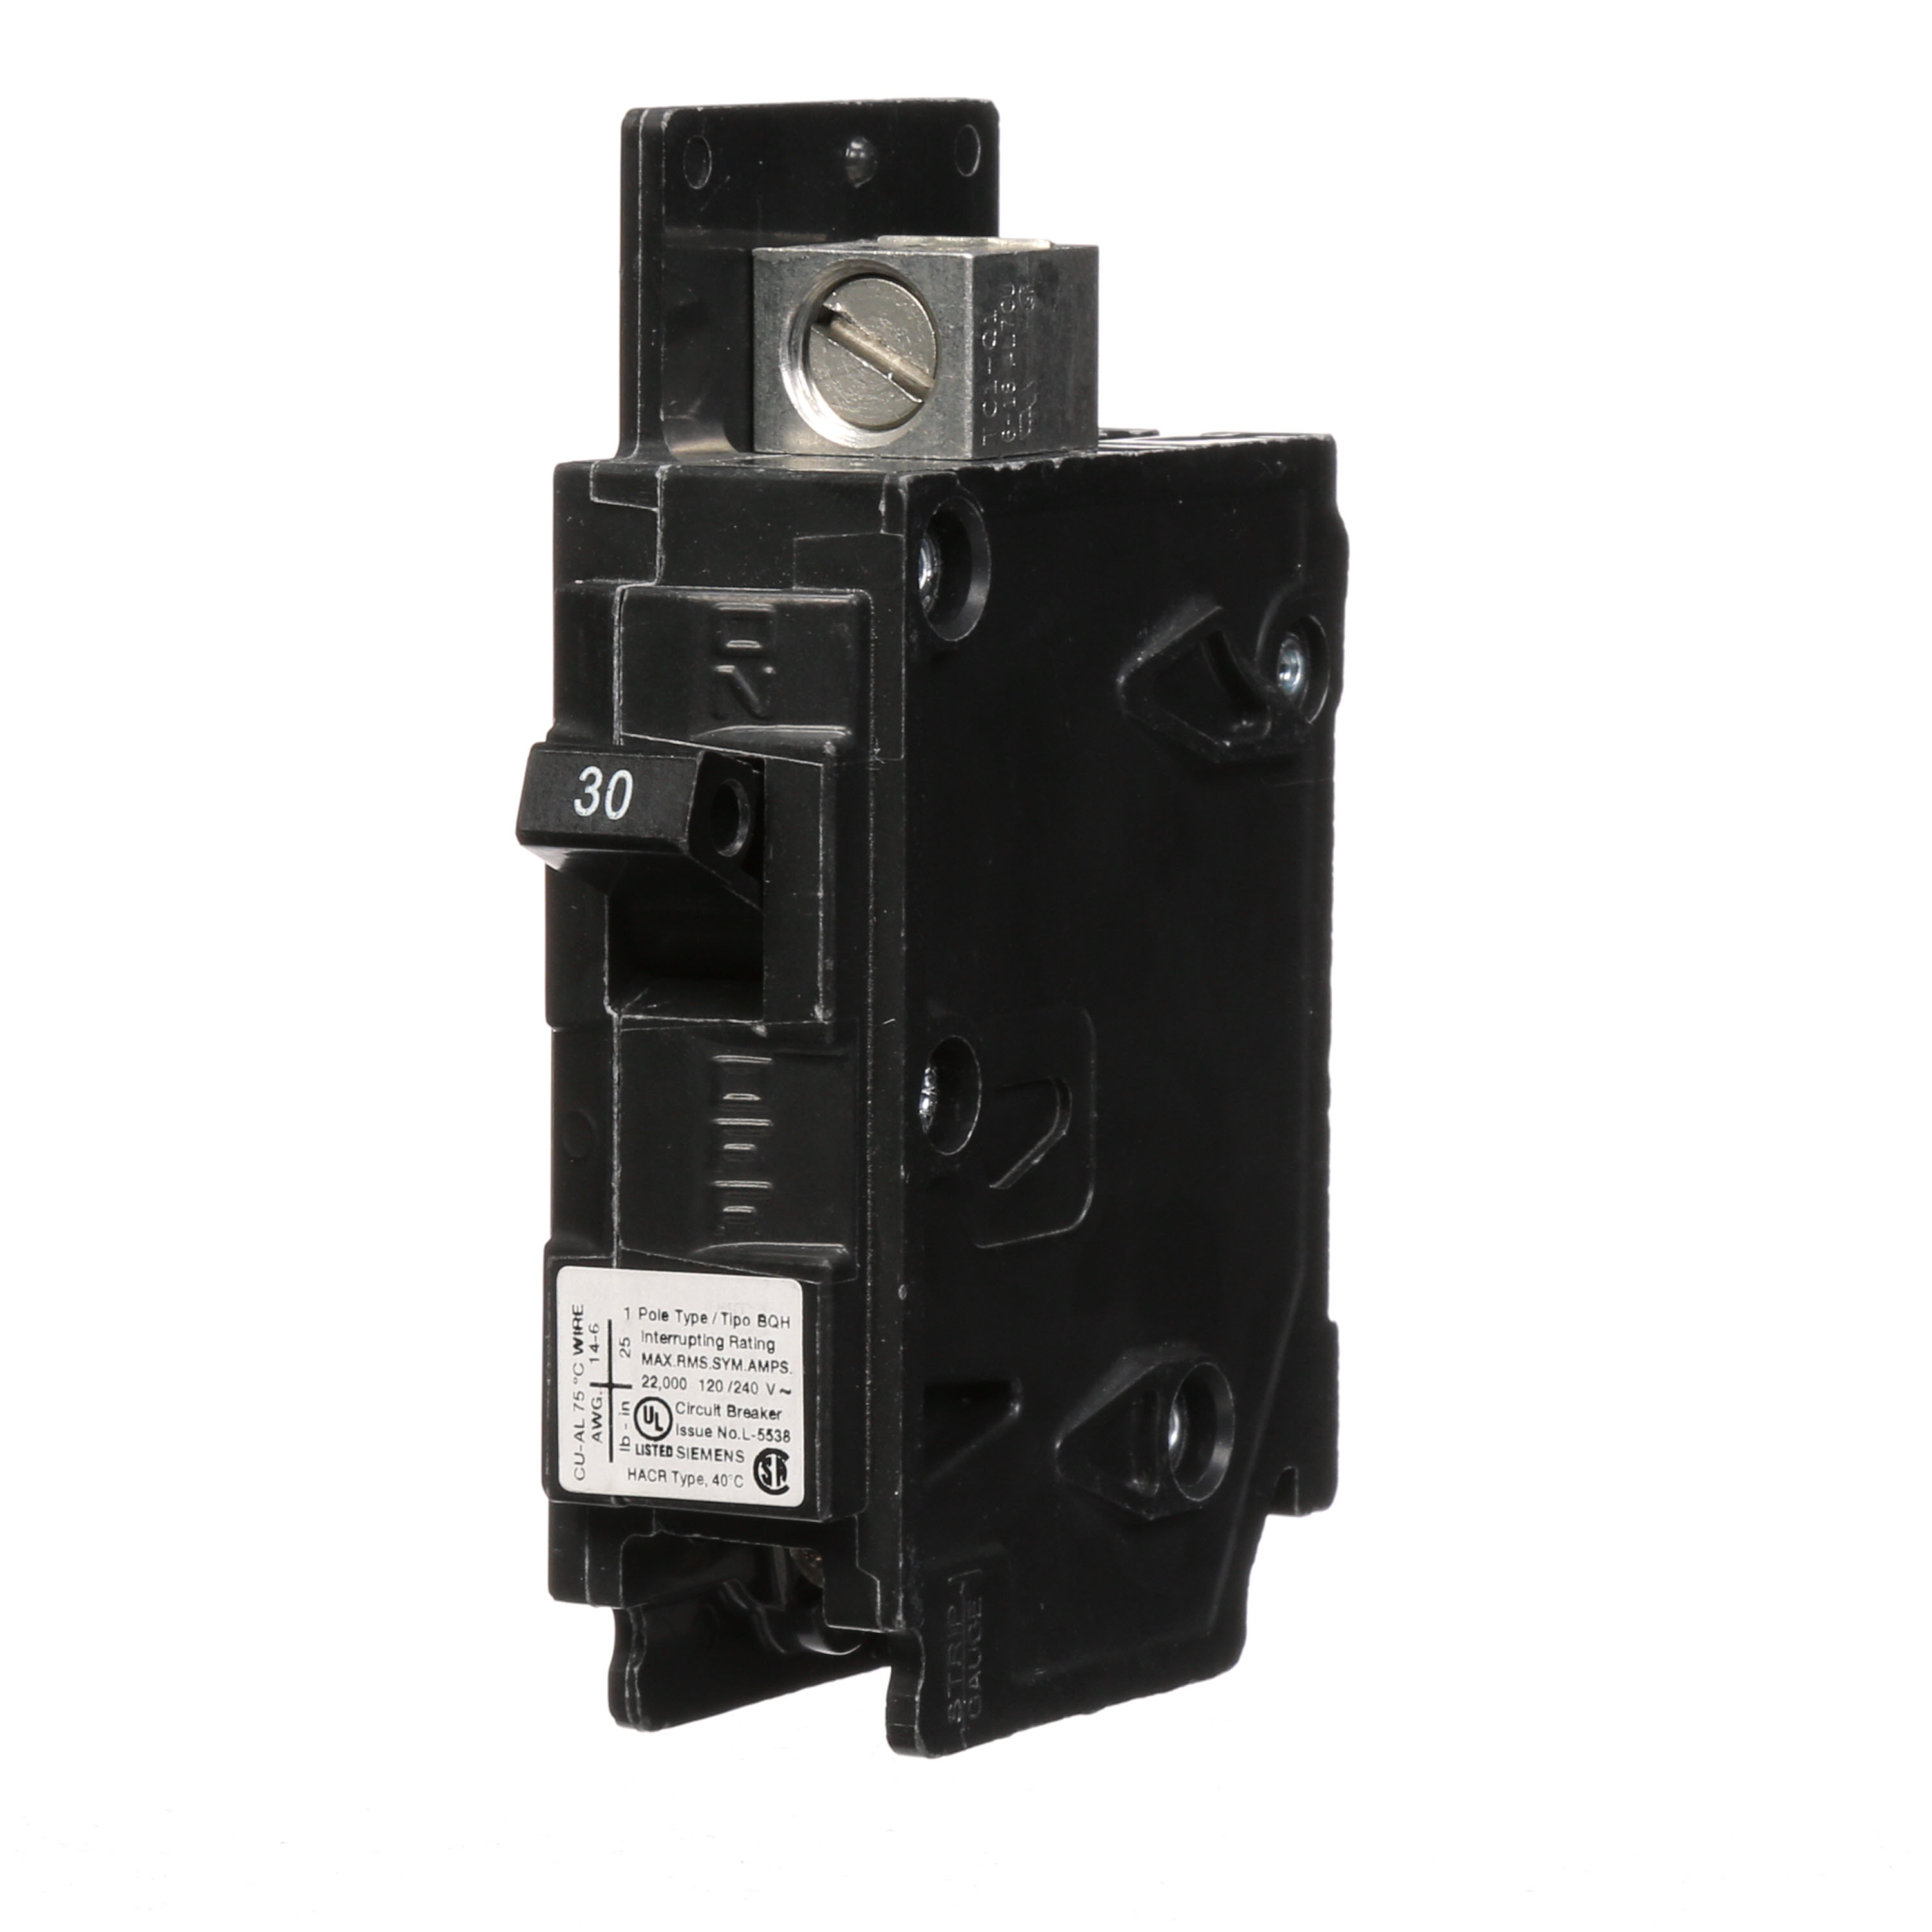 Siemens Low Voltage Molded Case Circuit Breakers General Purpose MCCBs are Circuit Protection Molded Case Circuit Breakers. 1-Pole circuit breaker type BQH. Rated 120V (030A) (AIR 22 kA). Special features Load side lugs are included.